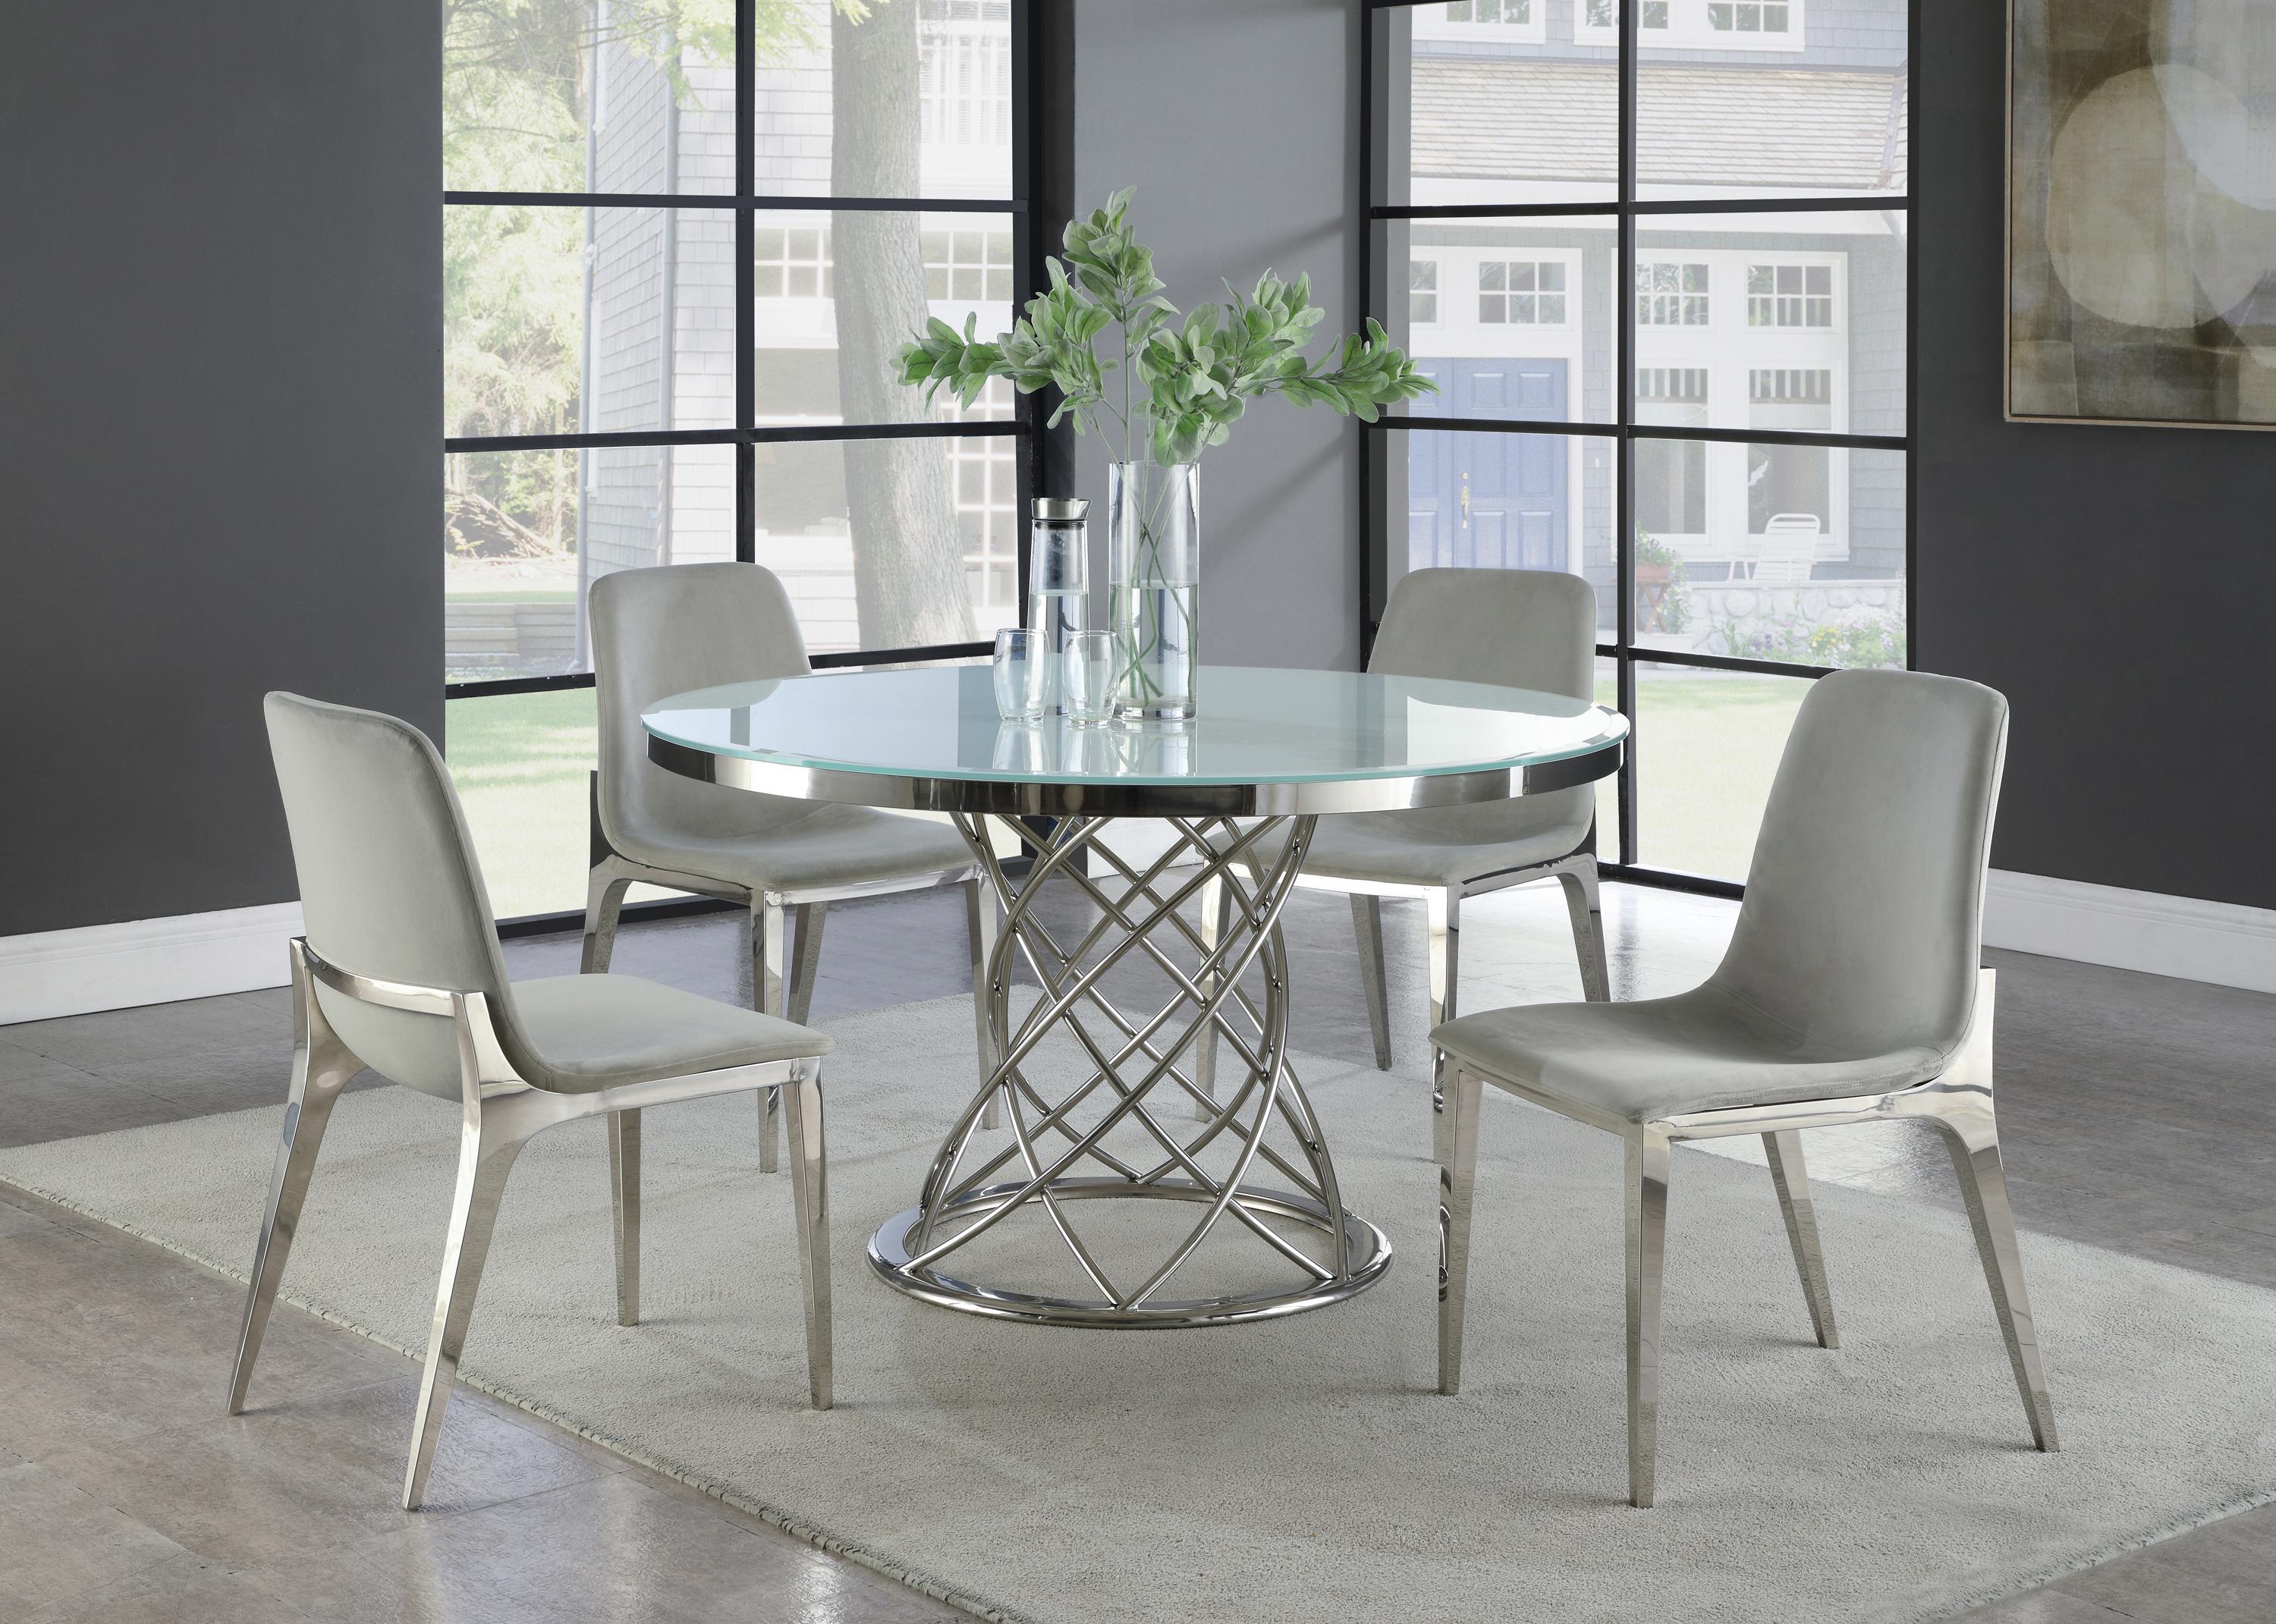 

    
Contemporary Chrome Stainless Steel Dining Room Set 5pcs Coaster 110401-S5 Irene
